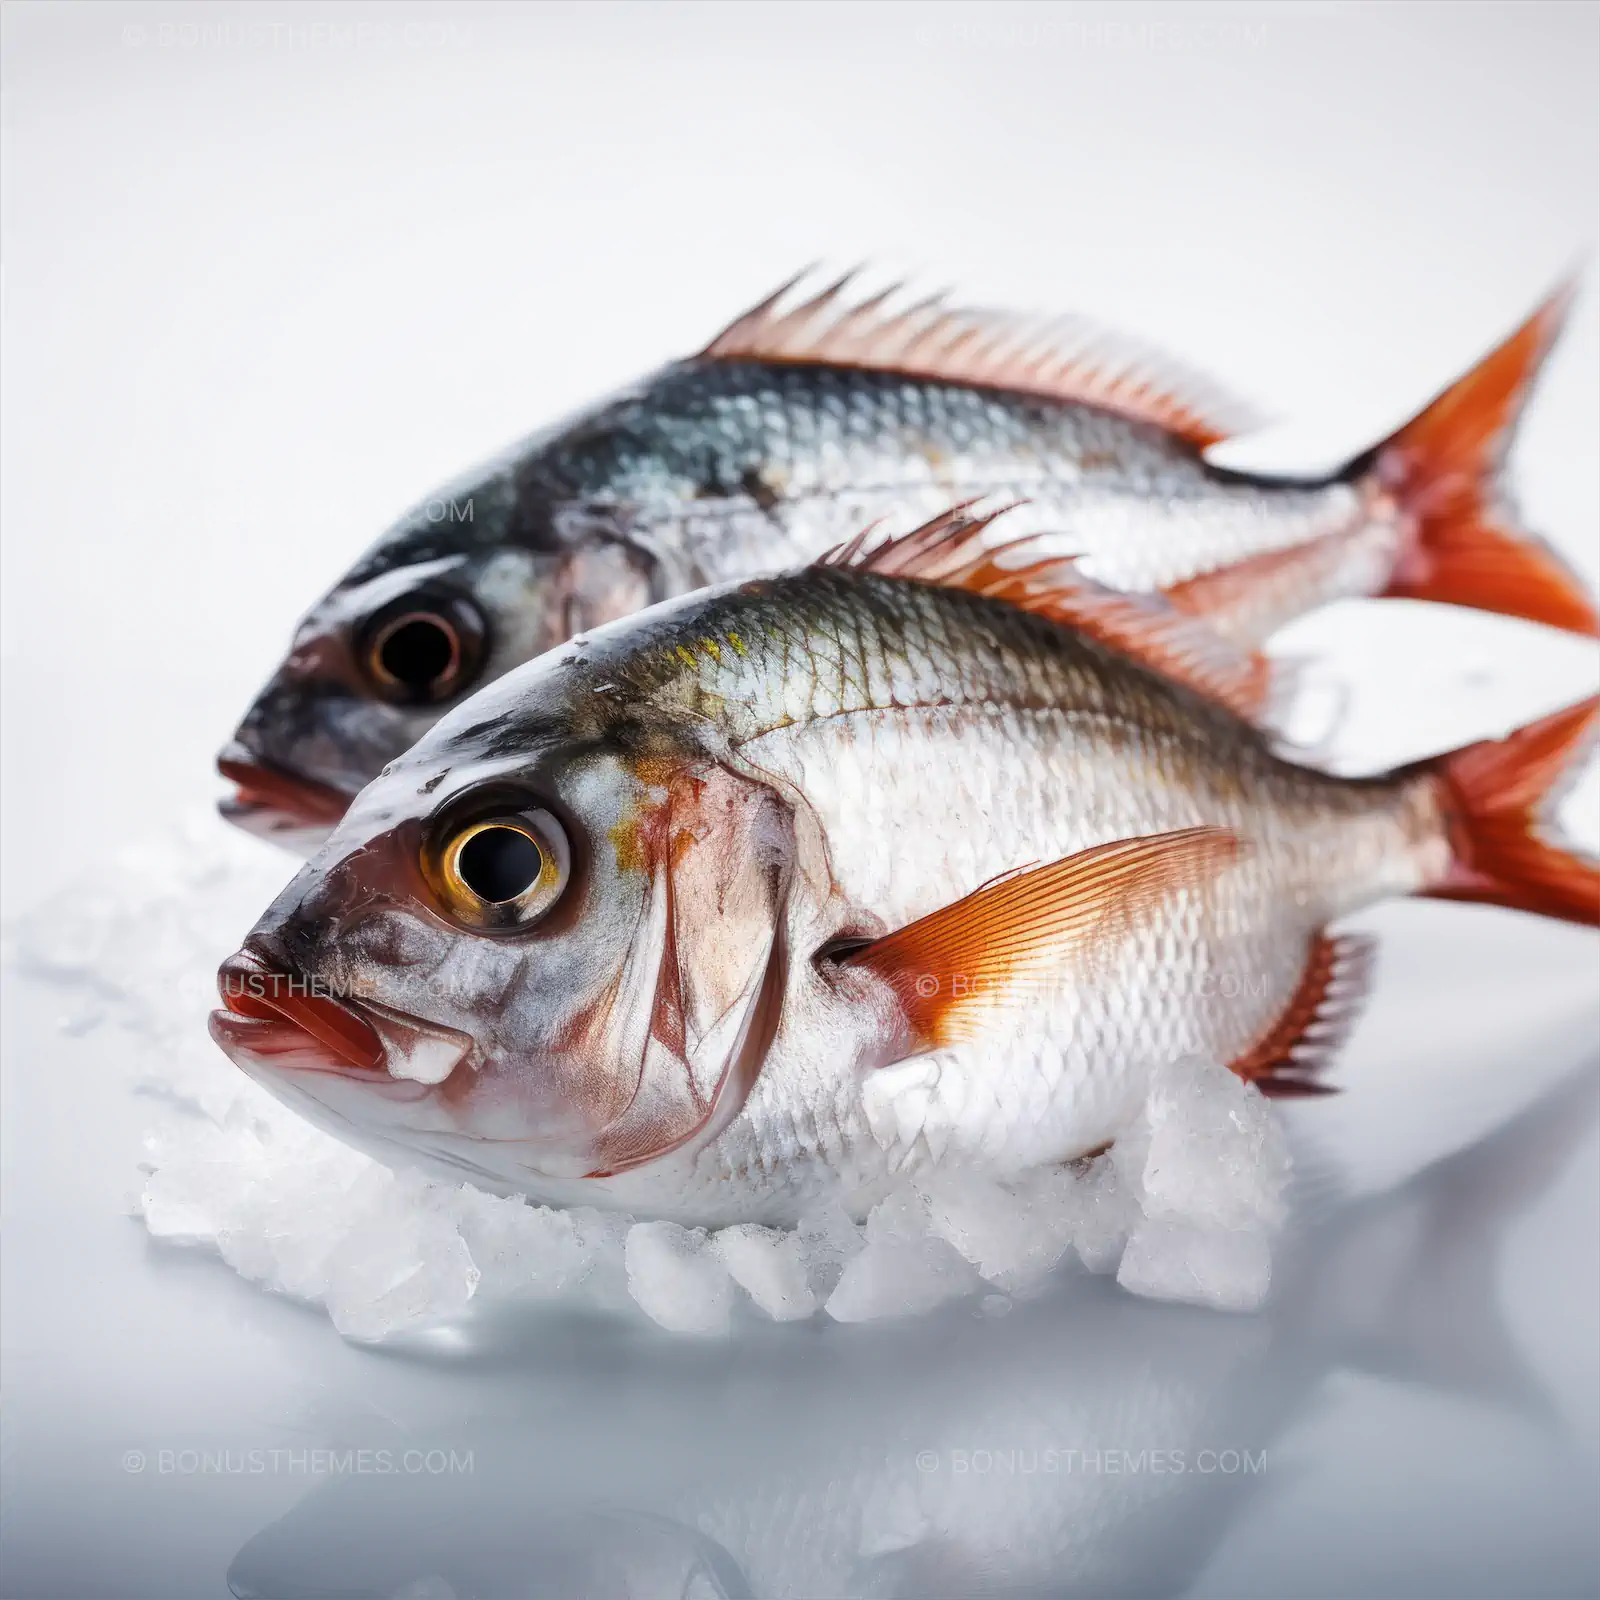 Two fresh fish on ice